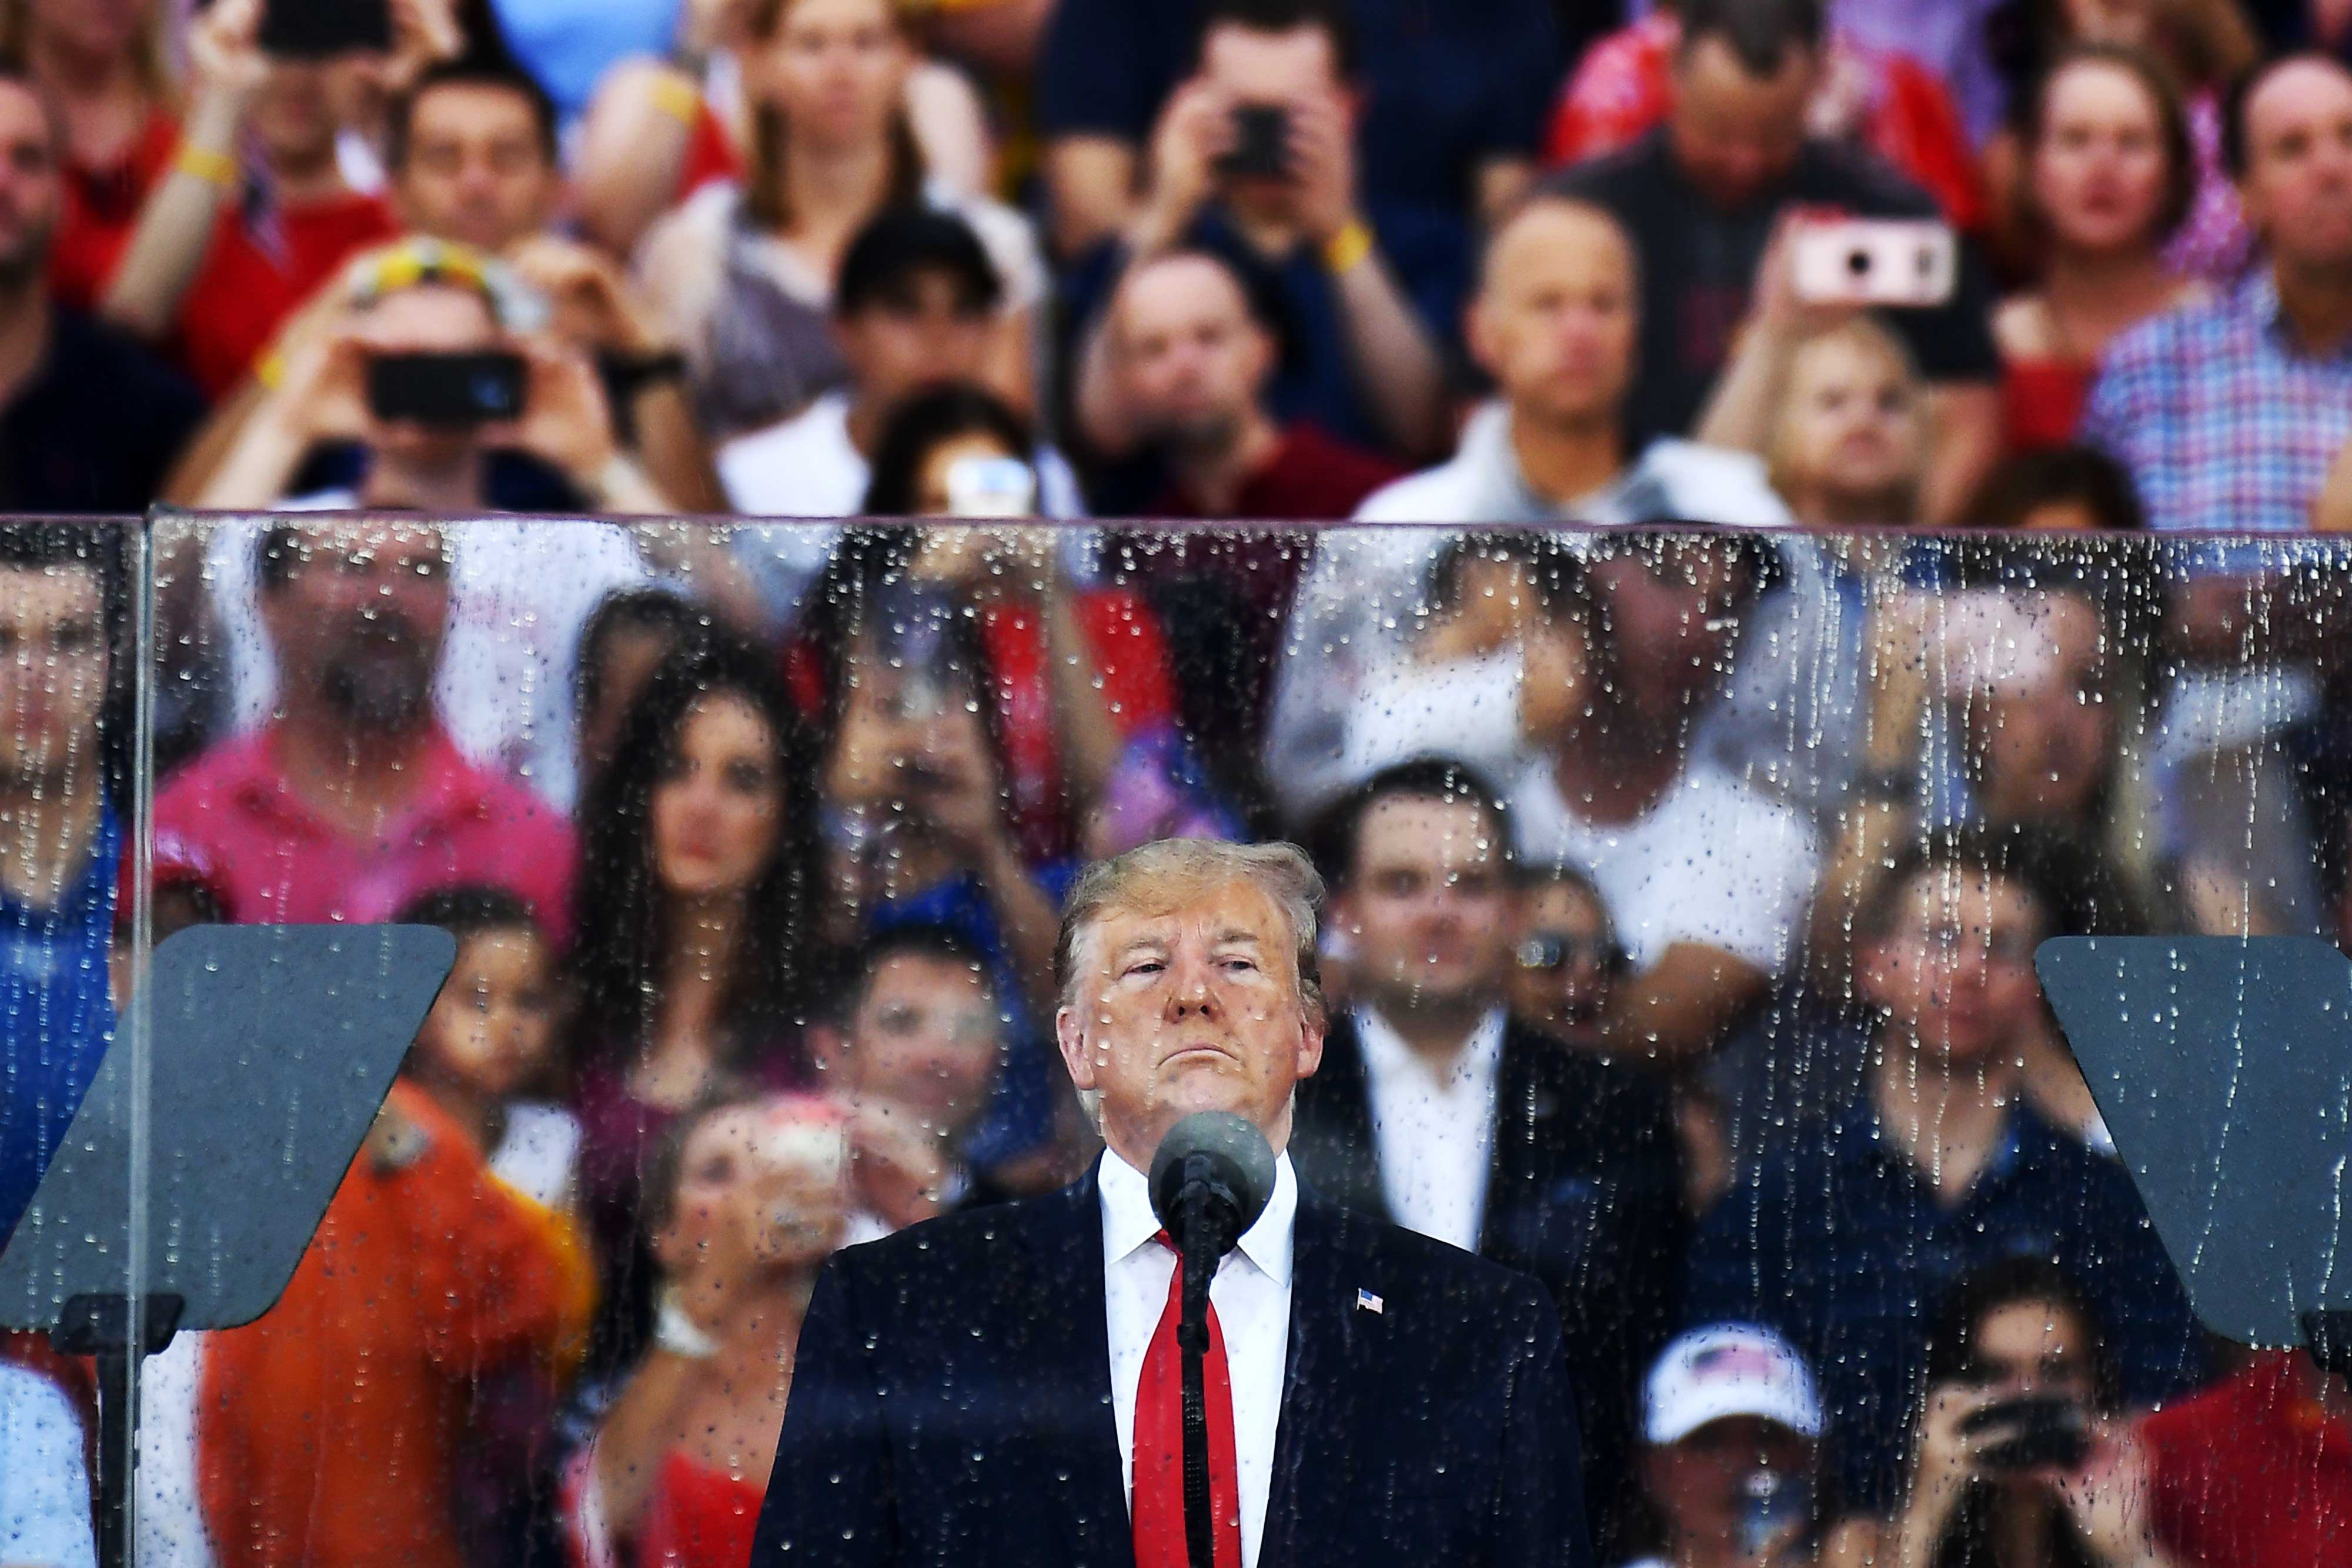 Trump, in a navy suit and bright red tie, scowls in front of a microphone. Behind him is bulletproof glass, wet from rain. And behind the glass, a crowd of cheering Trump supporters wearing red, white, and blue.